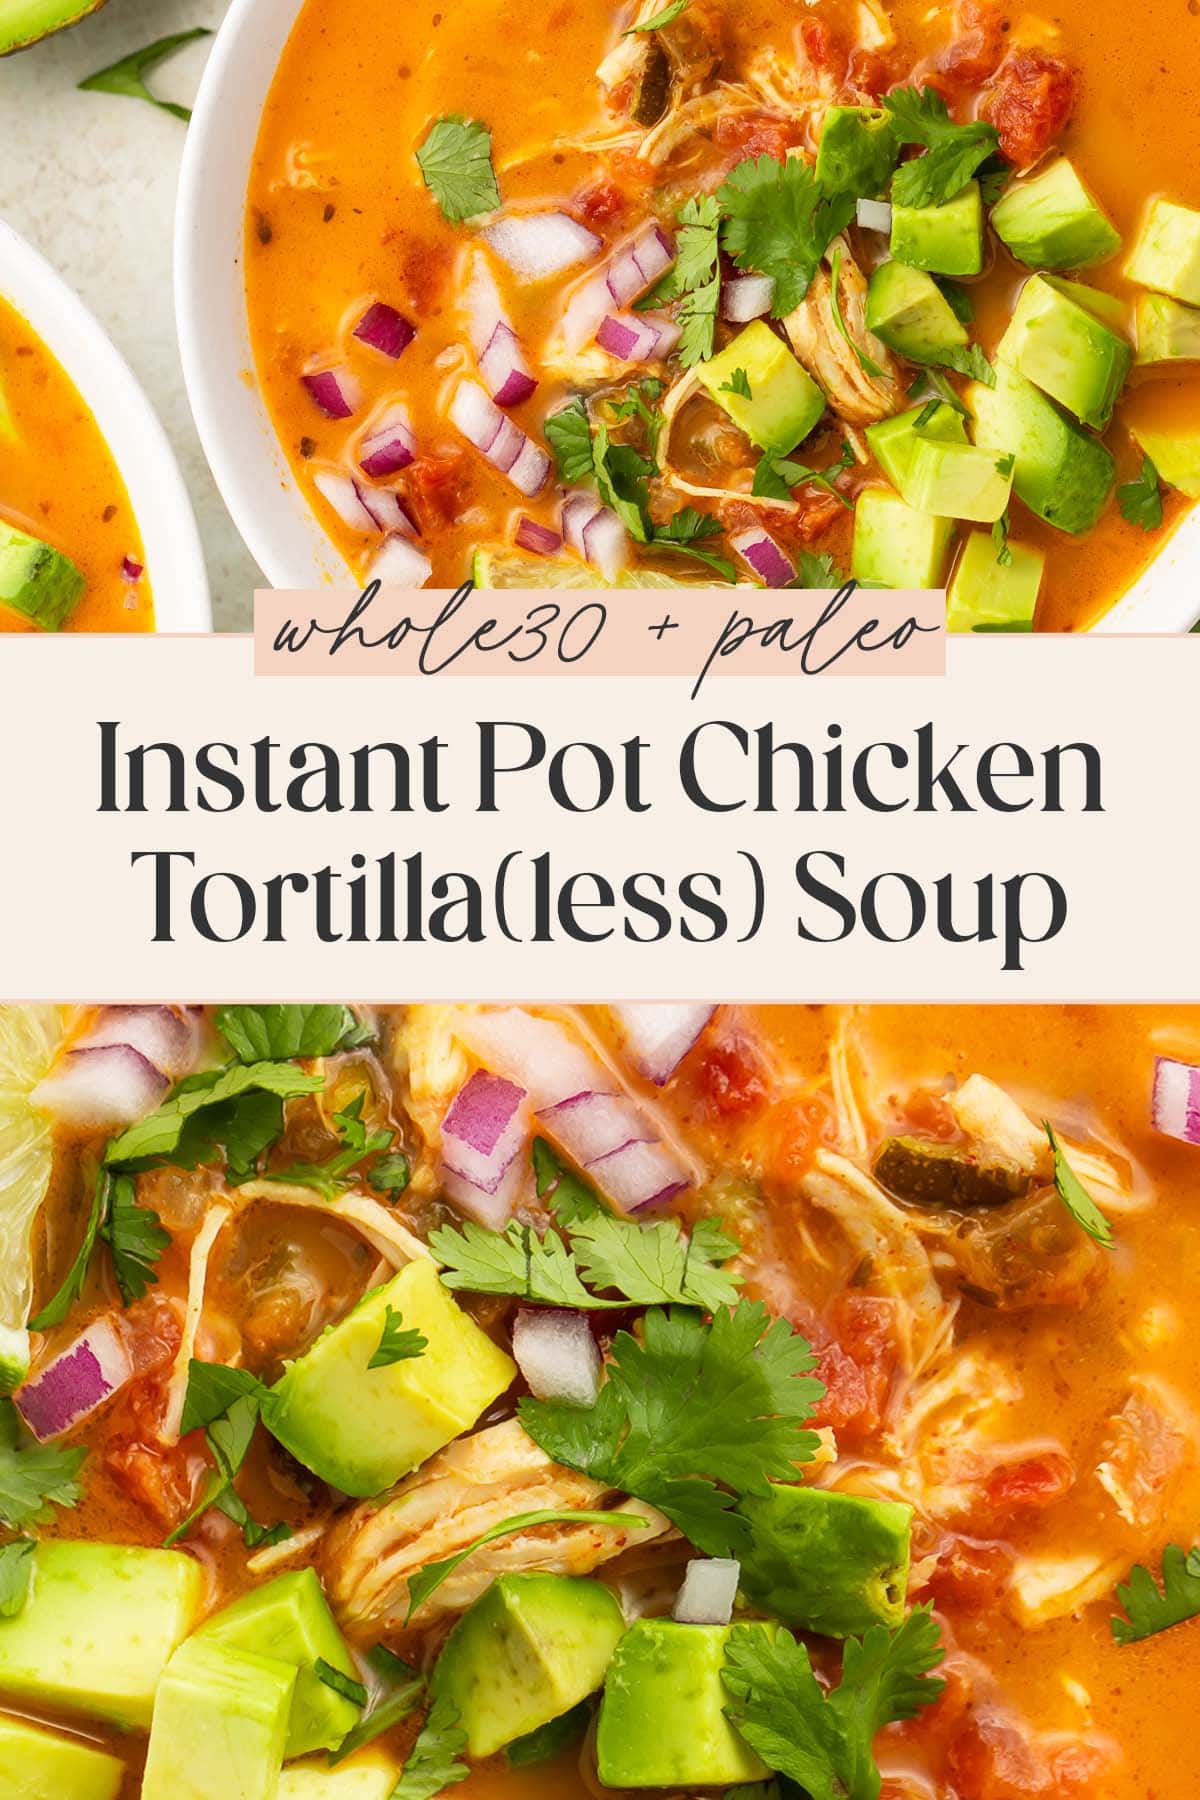 Pin graphic for Whole30 chicken tortilla-less soup.